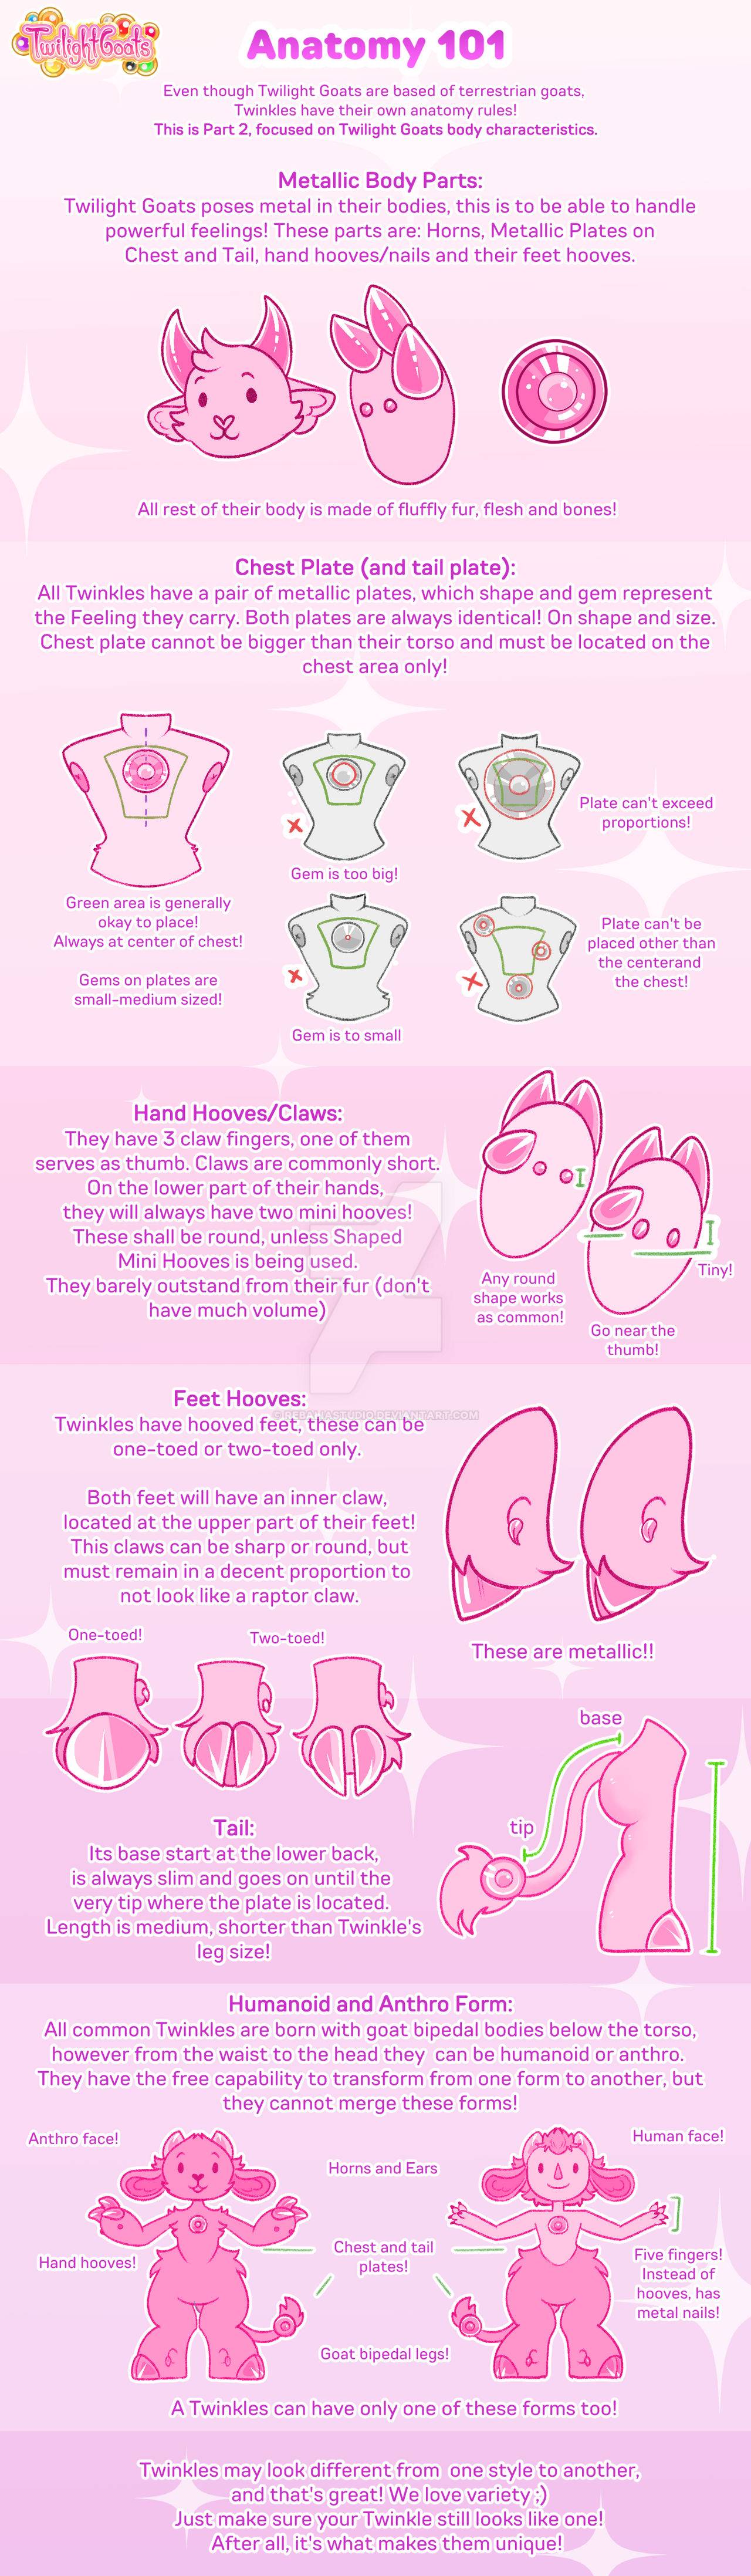 twilight_goats___anatomy_guide_101_part_